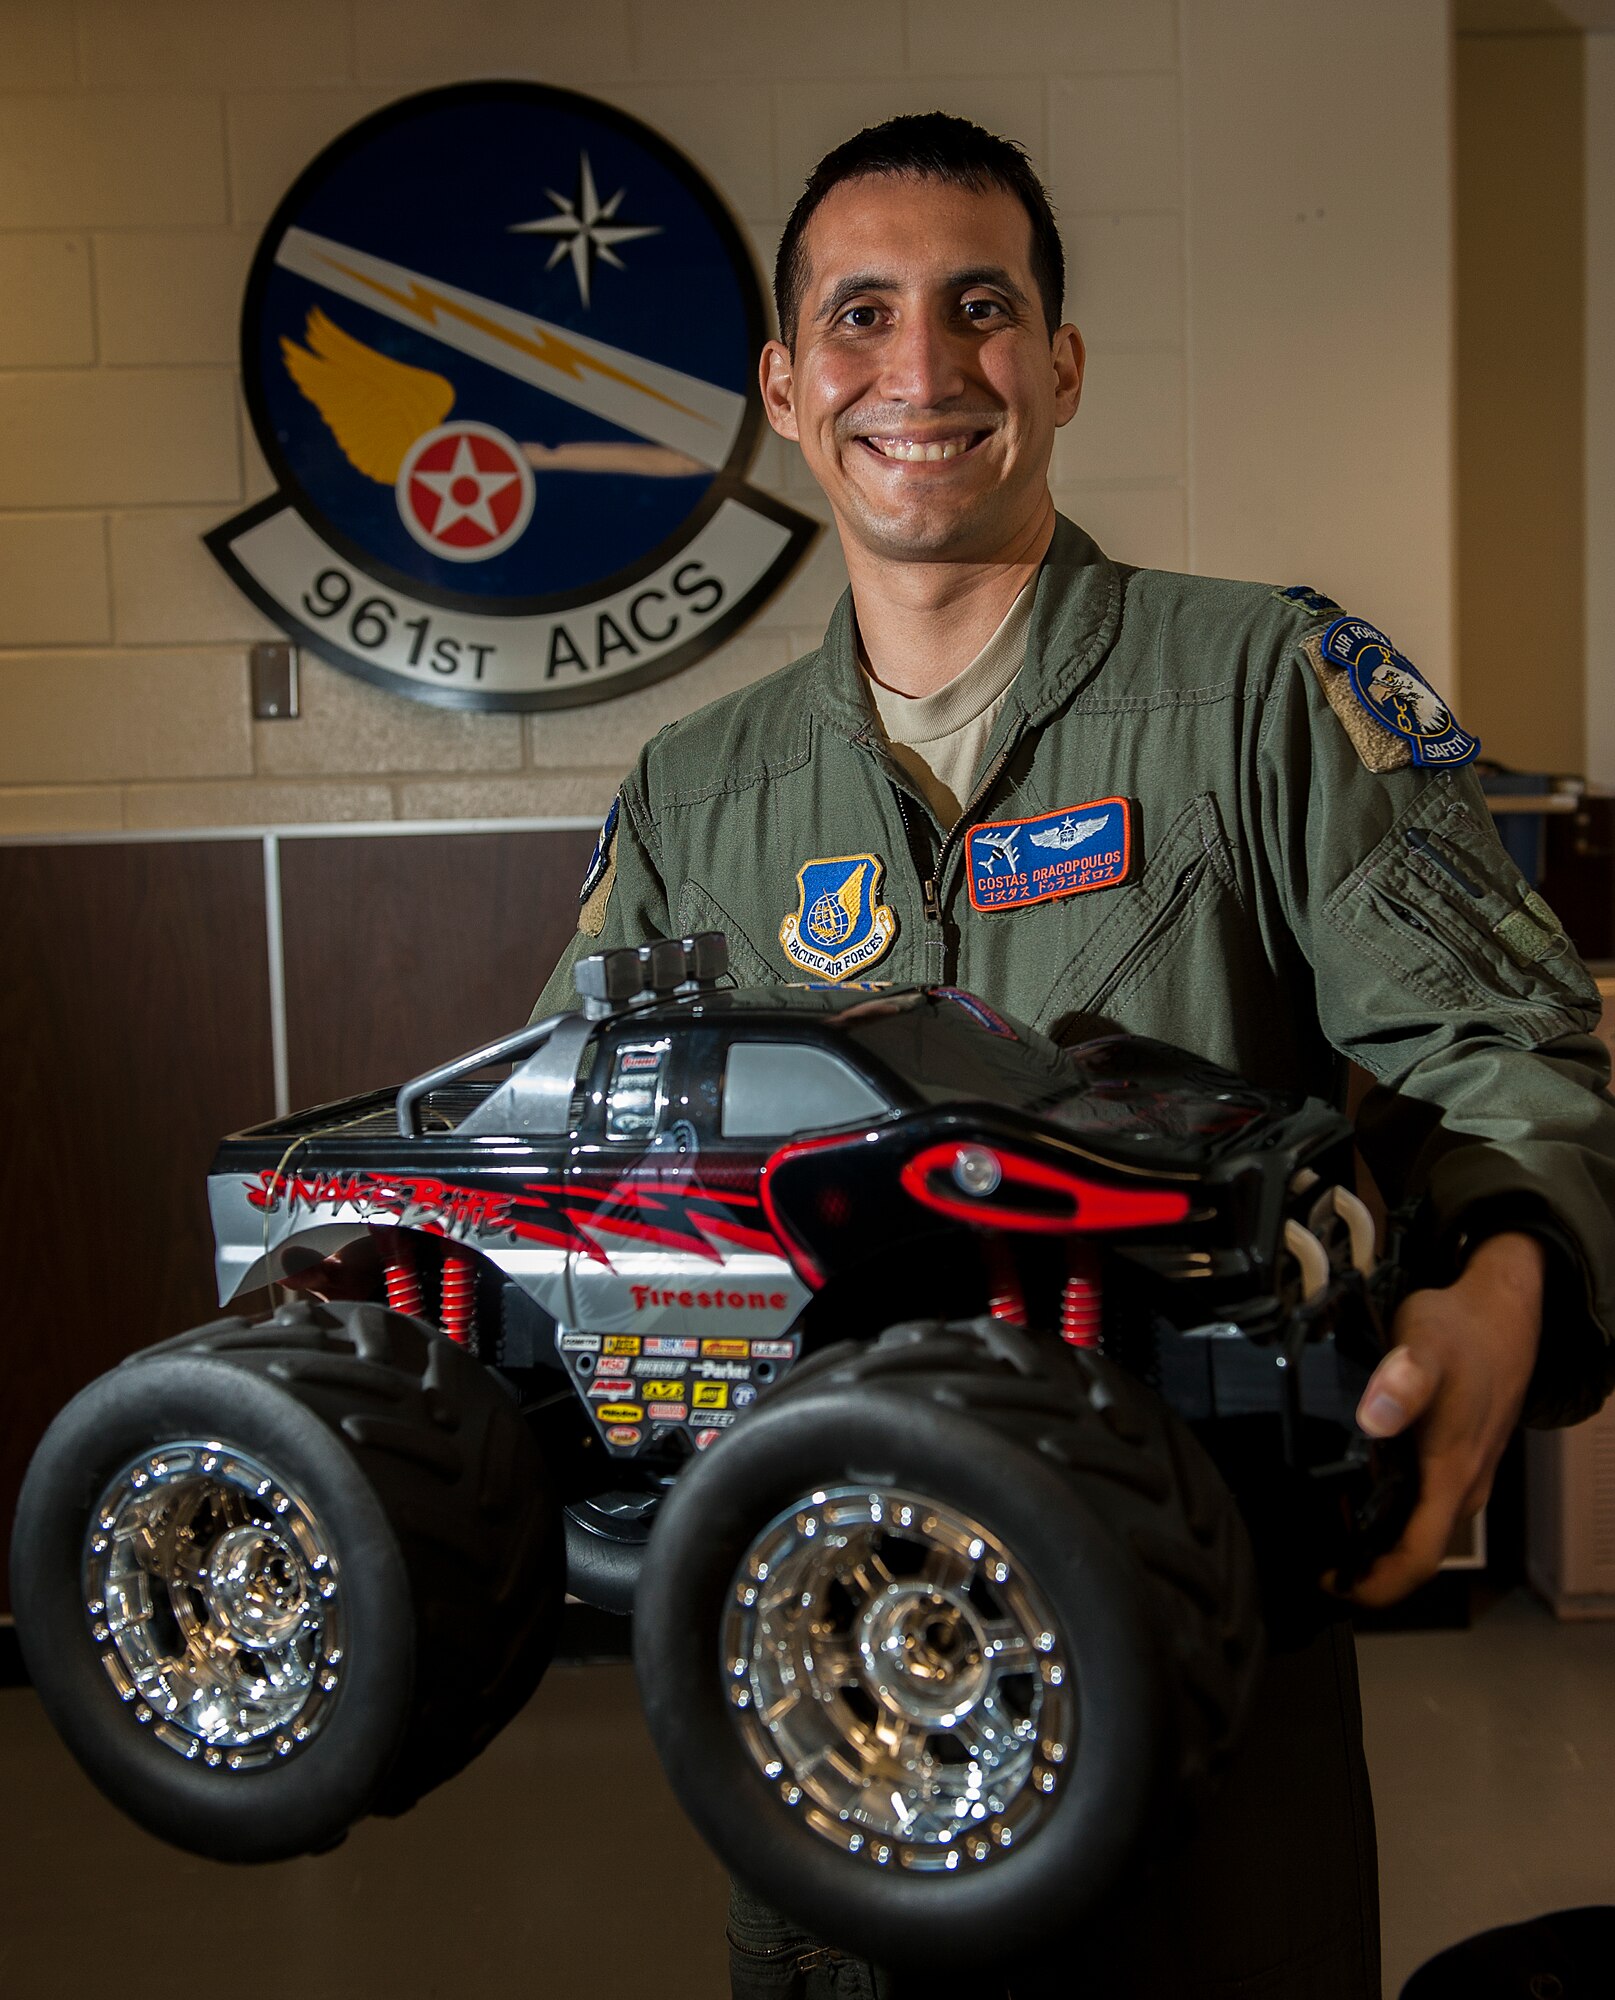 U.S. Air Force Capt. Costas Dracopoulos, 961st Airborne Air Control Squadron flight safety officer, holds a toy car in front of his squadron emblem Feb. 17, 2016, at Kadena Air Base, Japan. Having been personally affected, Dracopoulos organized a toy drive to send toys to the families of the victims of the San Bernardino shootings. The 961st AACS sent more than 50 toys in less than a week to support the families. (U.S. Air Force photo by Airman 1st Class Corey M. Pettis)